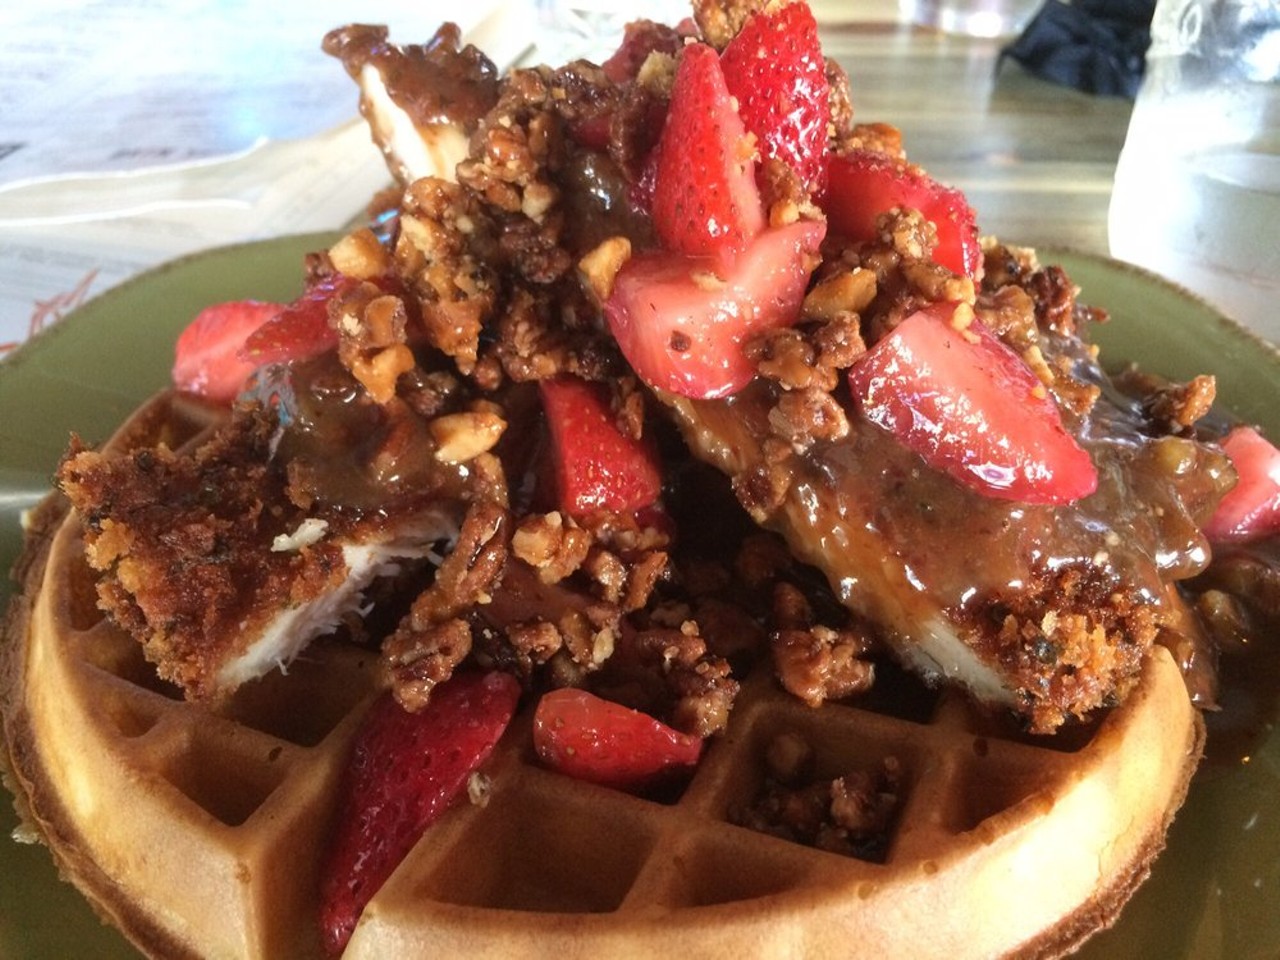 Chicken and waffles - Punch Bowl Social - 1086 W 11th St